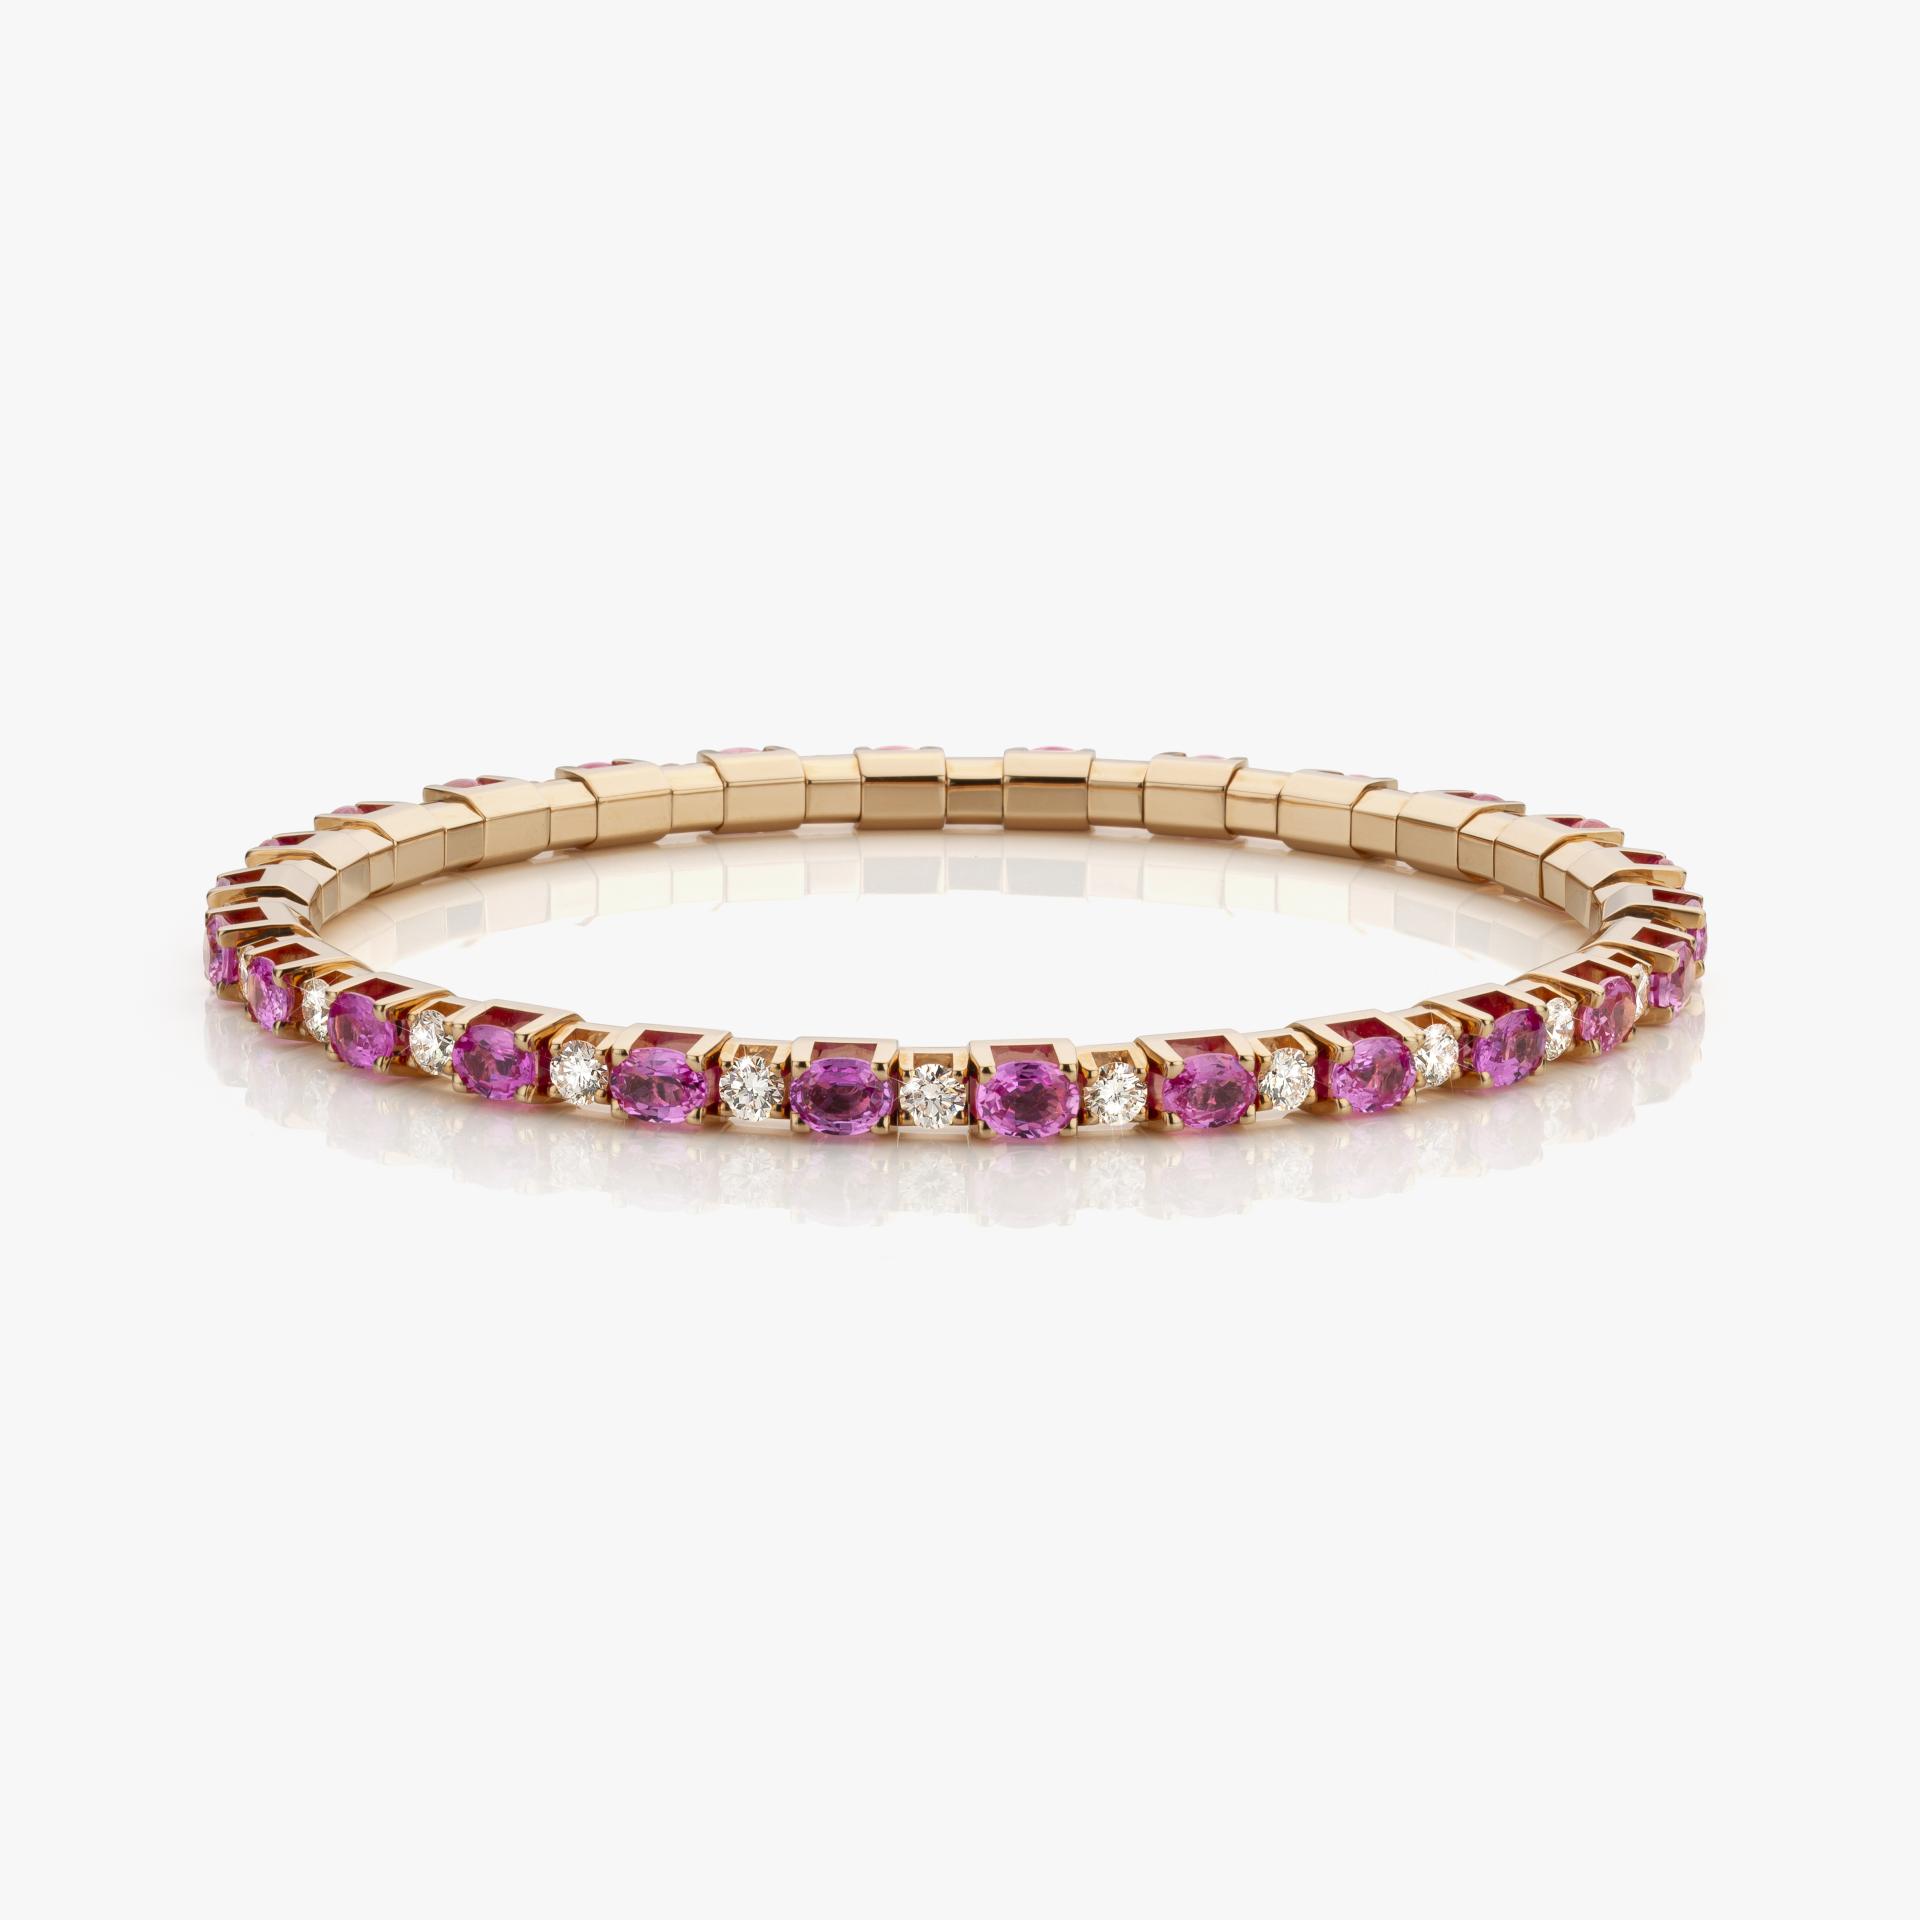 Rose gold bracelet Extensible set with diamonds and pink sapphires made by Demeglio